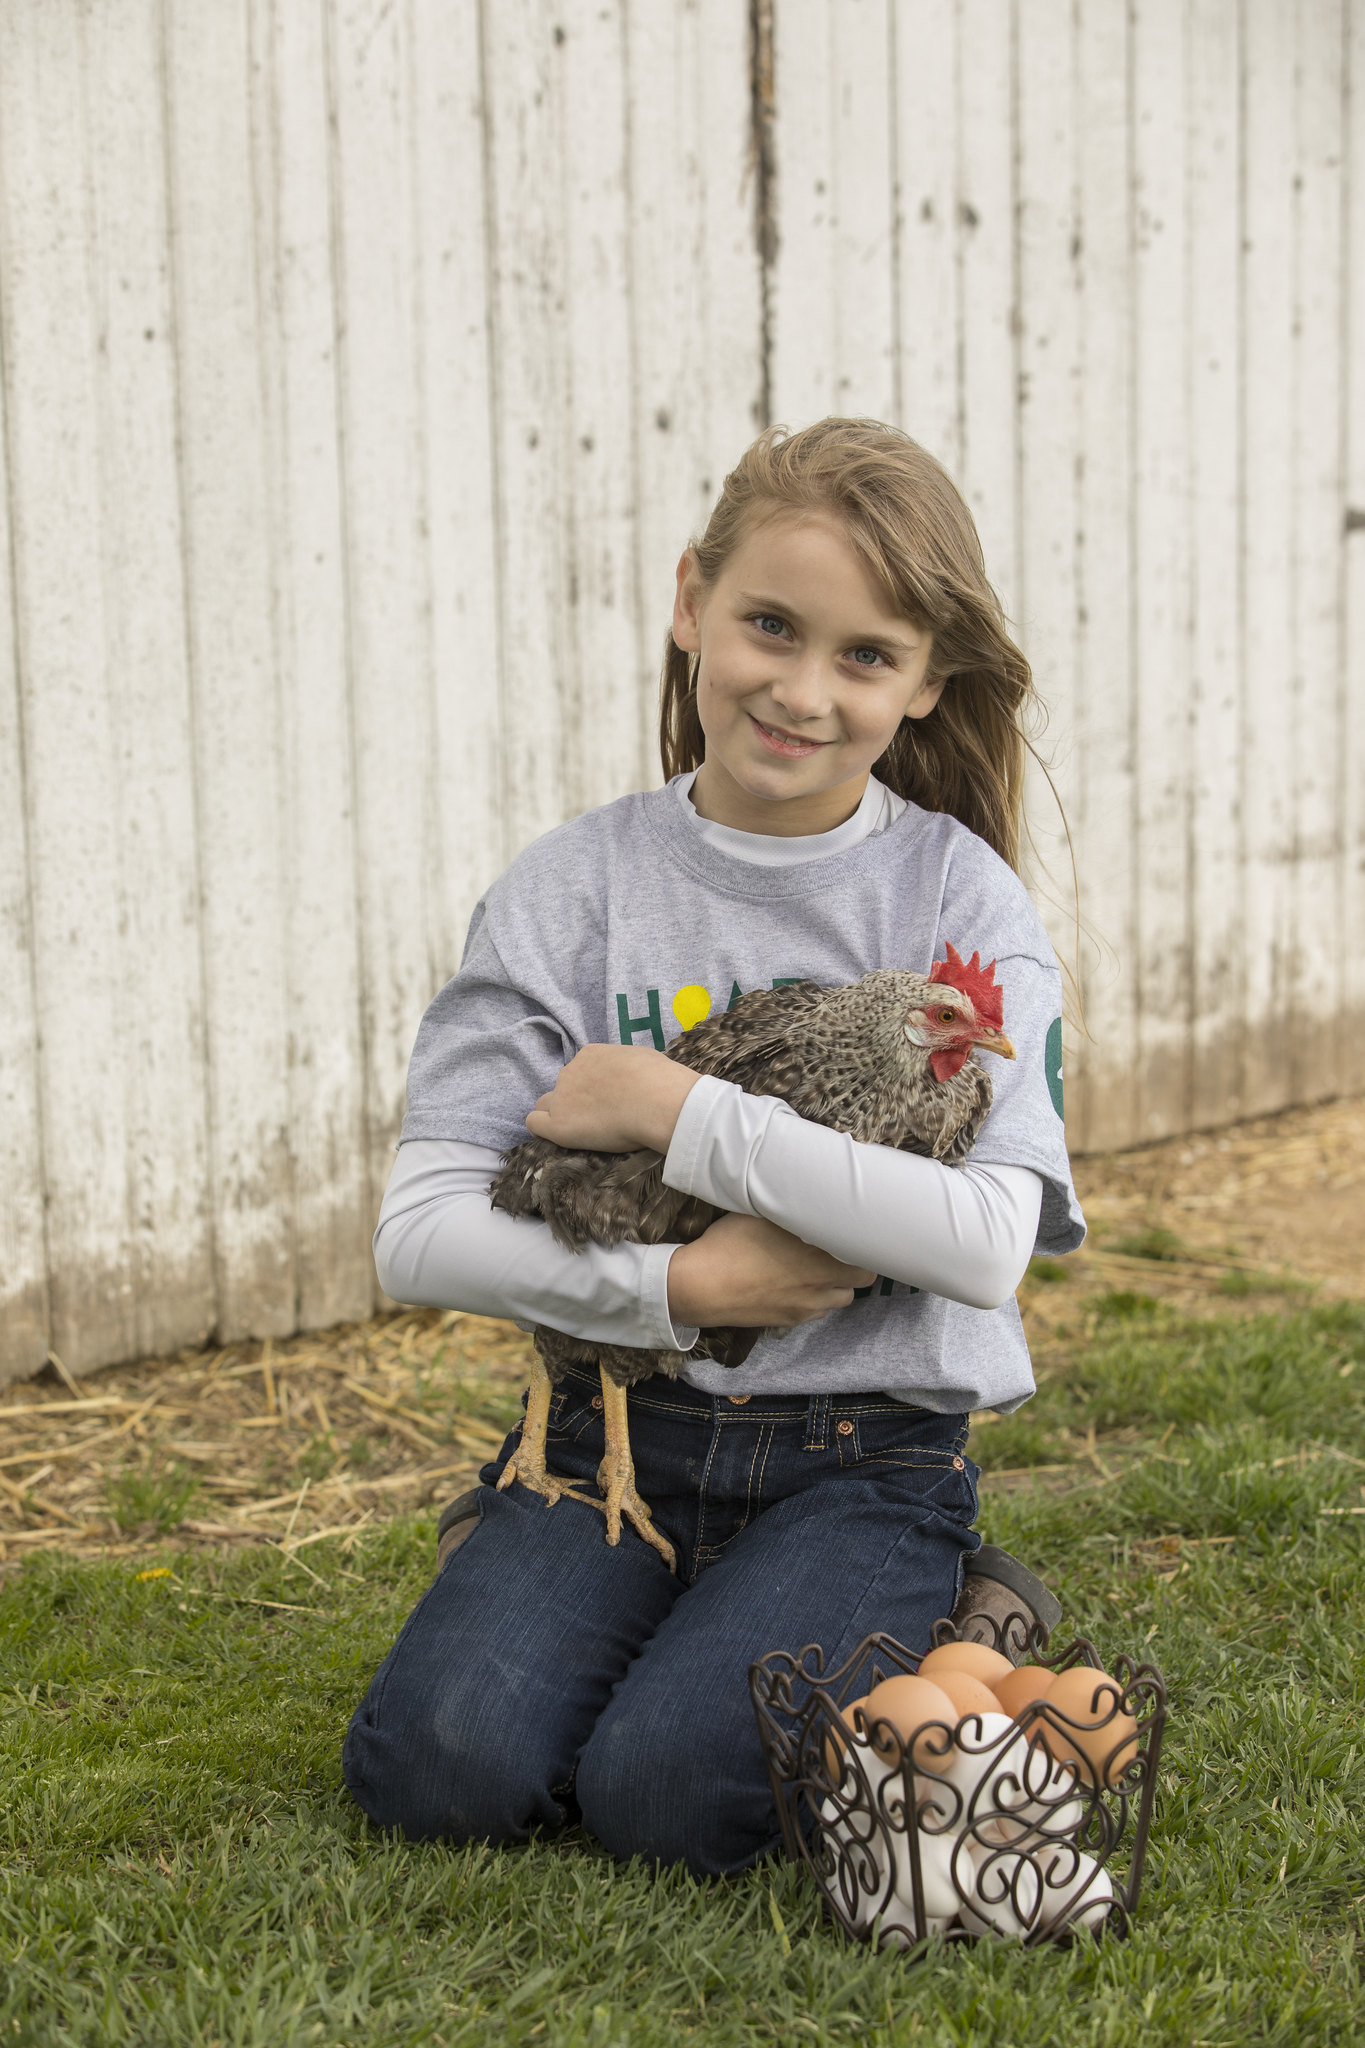 4-H member holding a chicken next to a basket of eggs